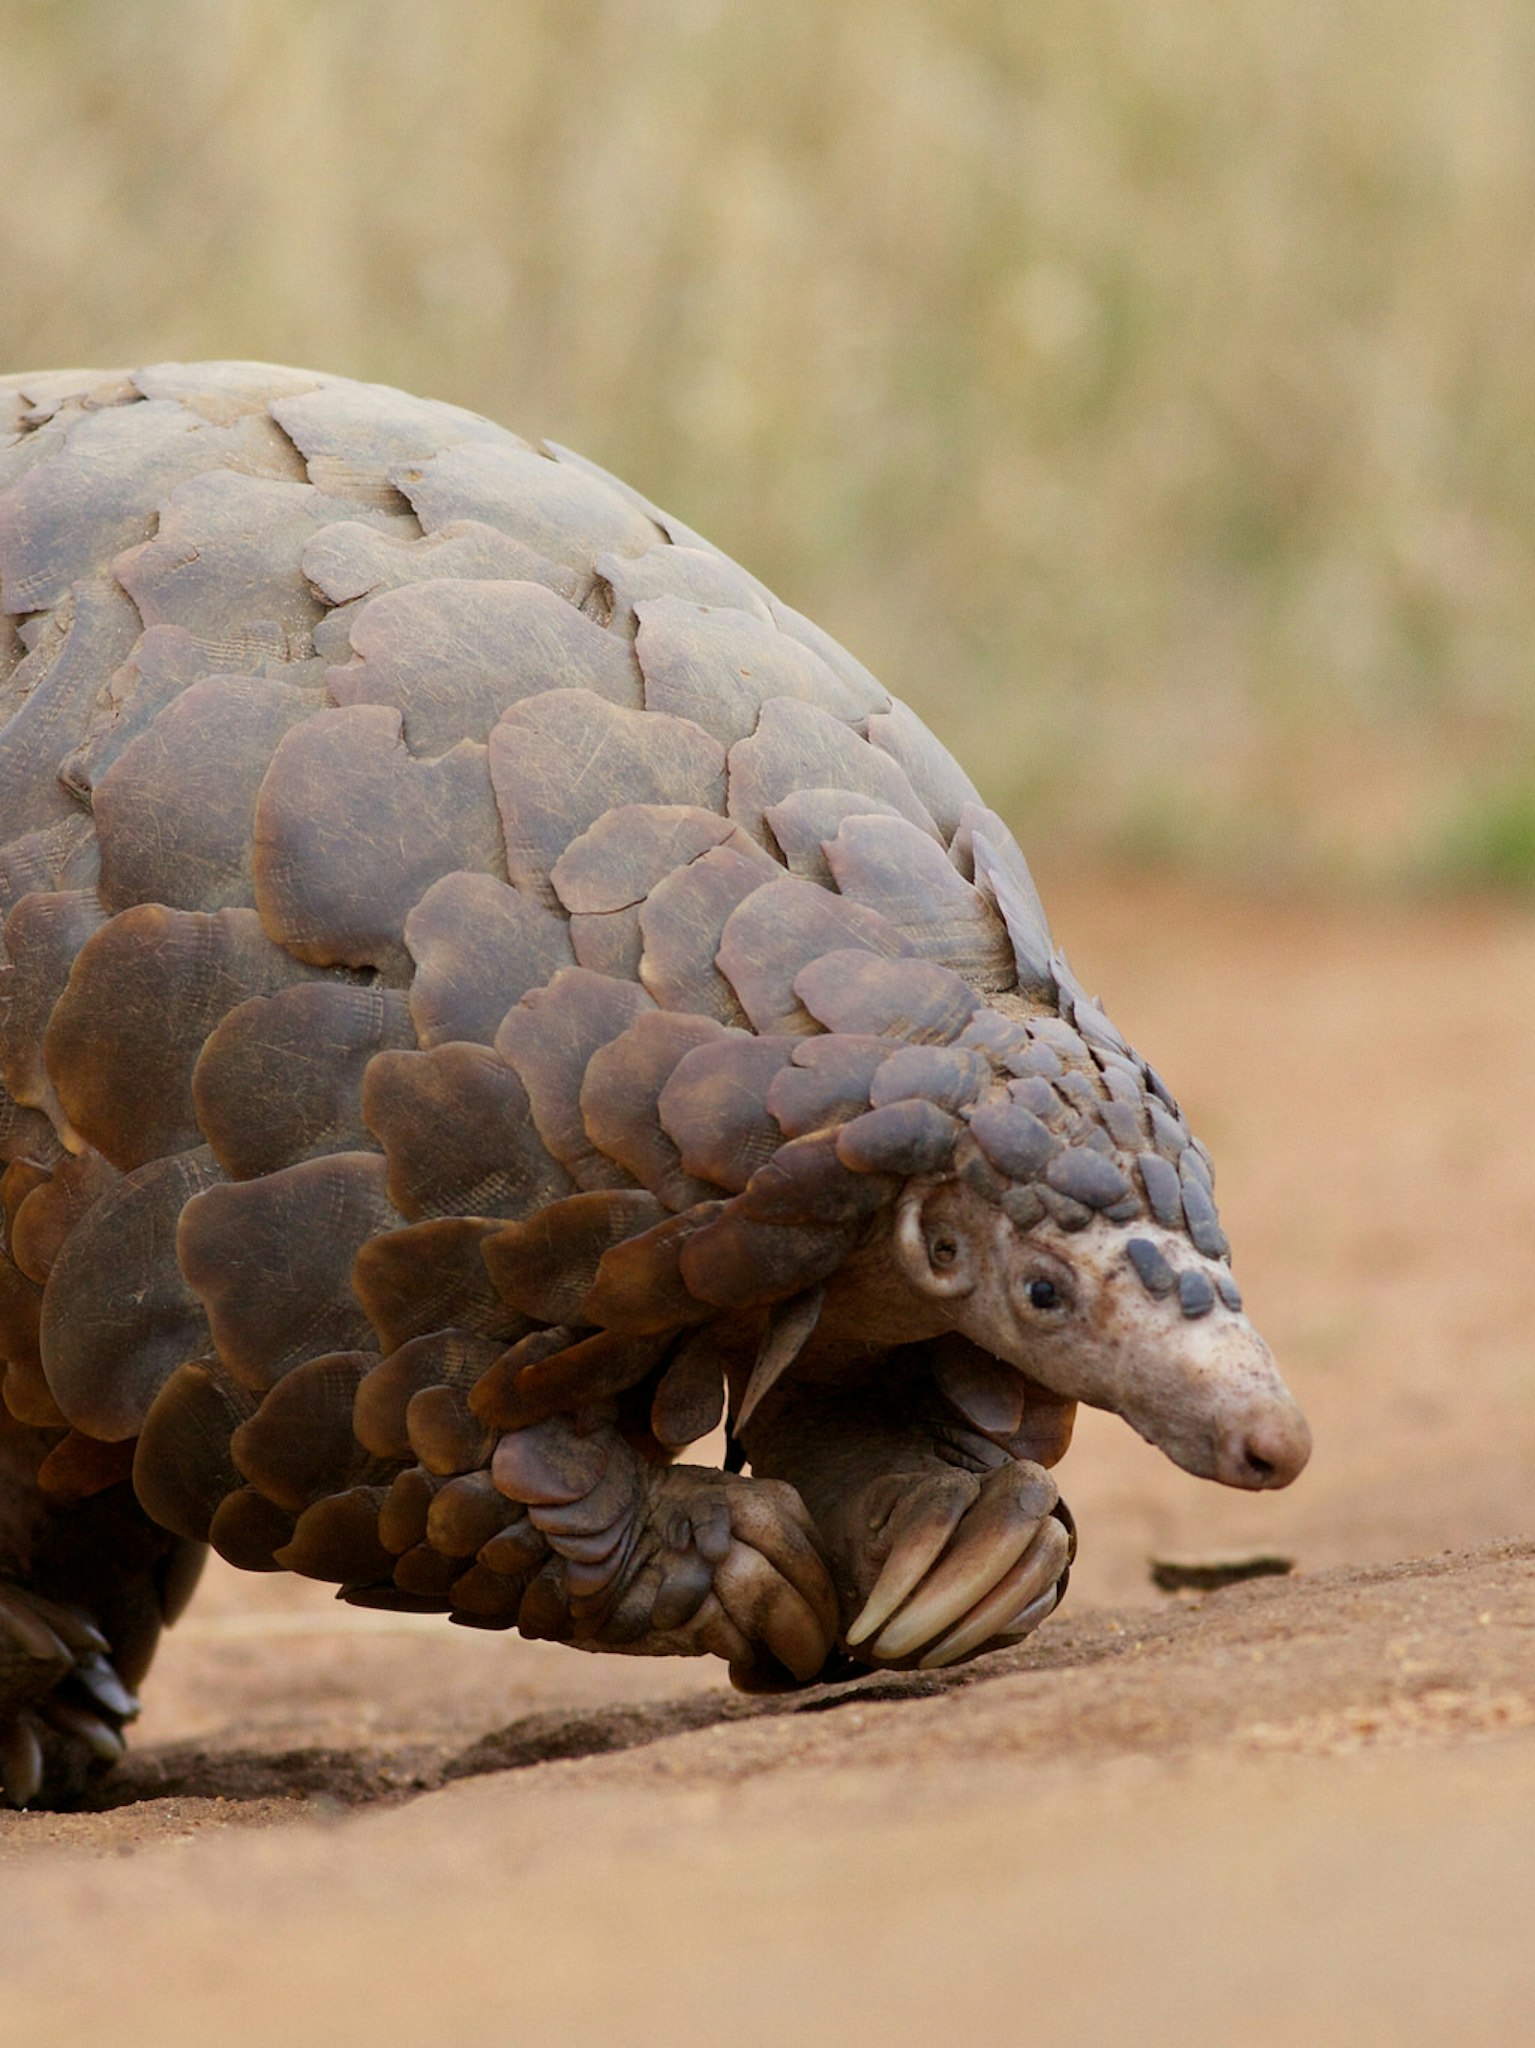 The Pangolin Is Scaly, Weird, Cute, and the Most Poached Mammal on Earth | Inverse